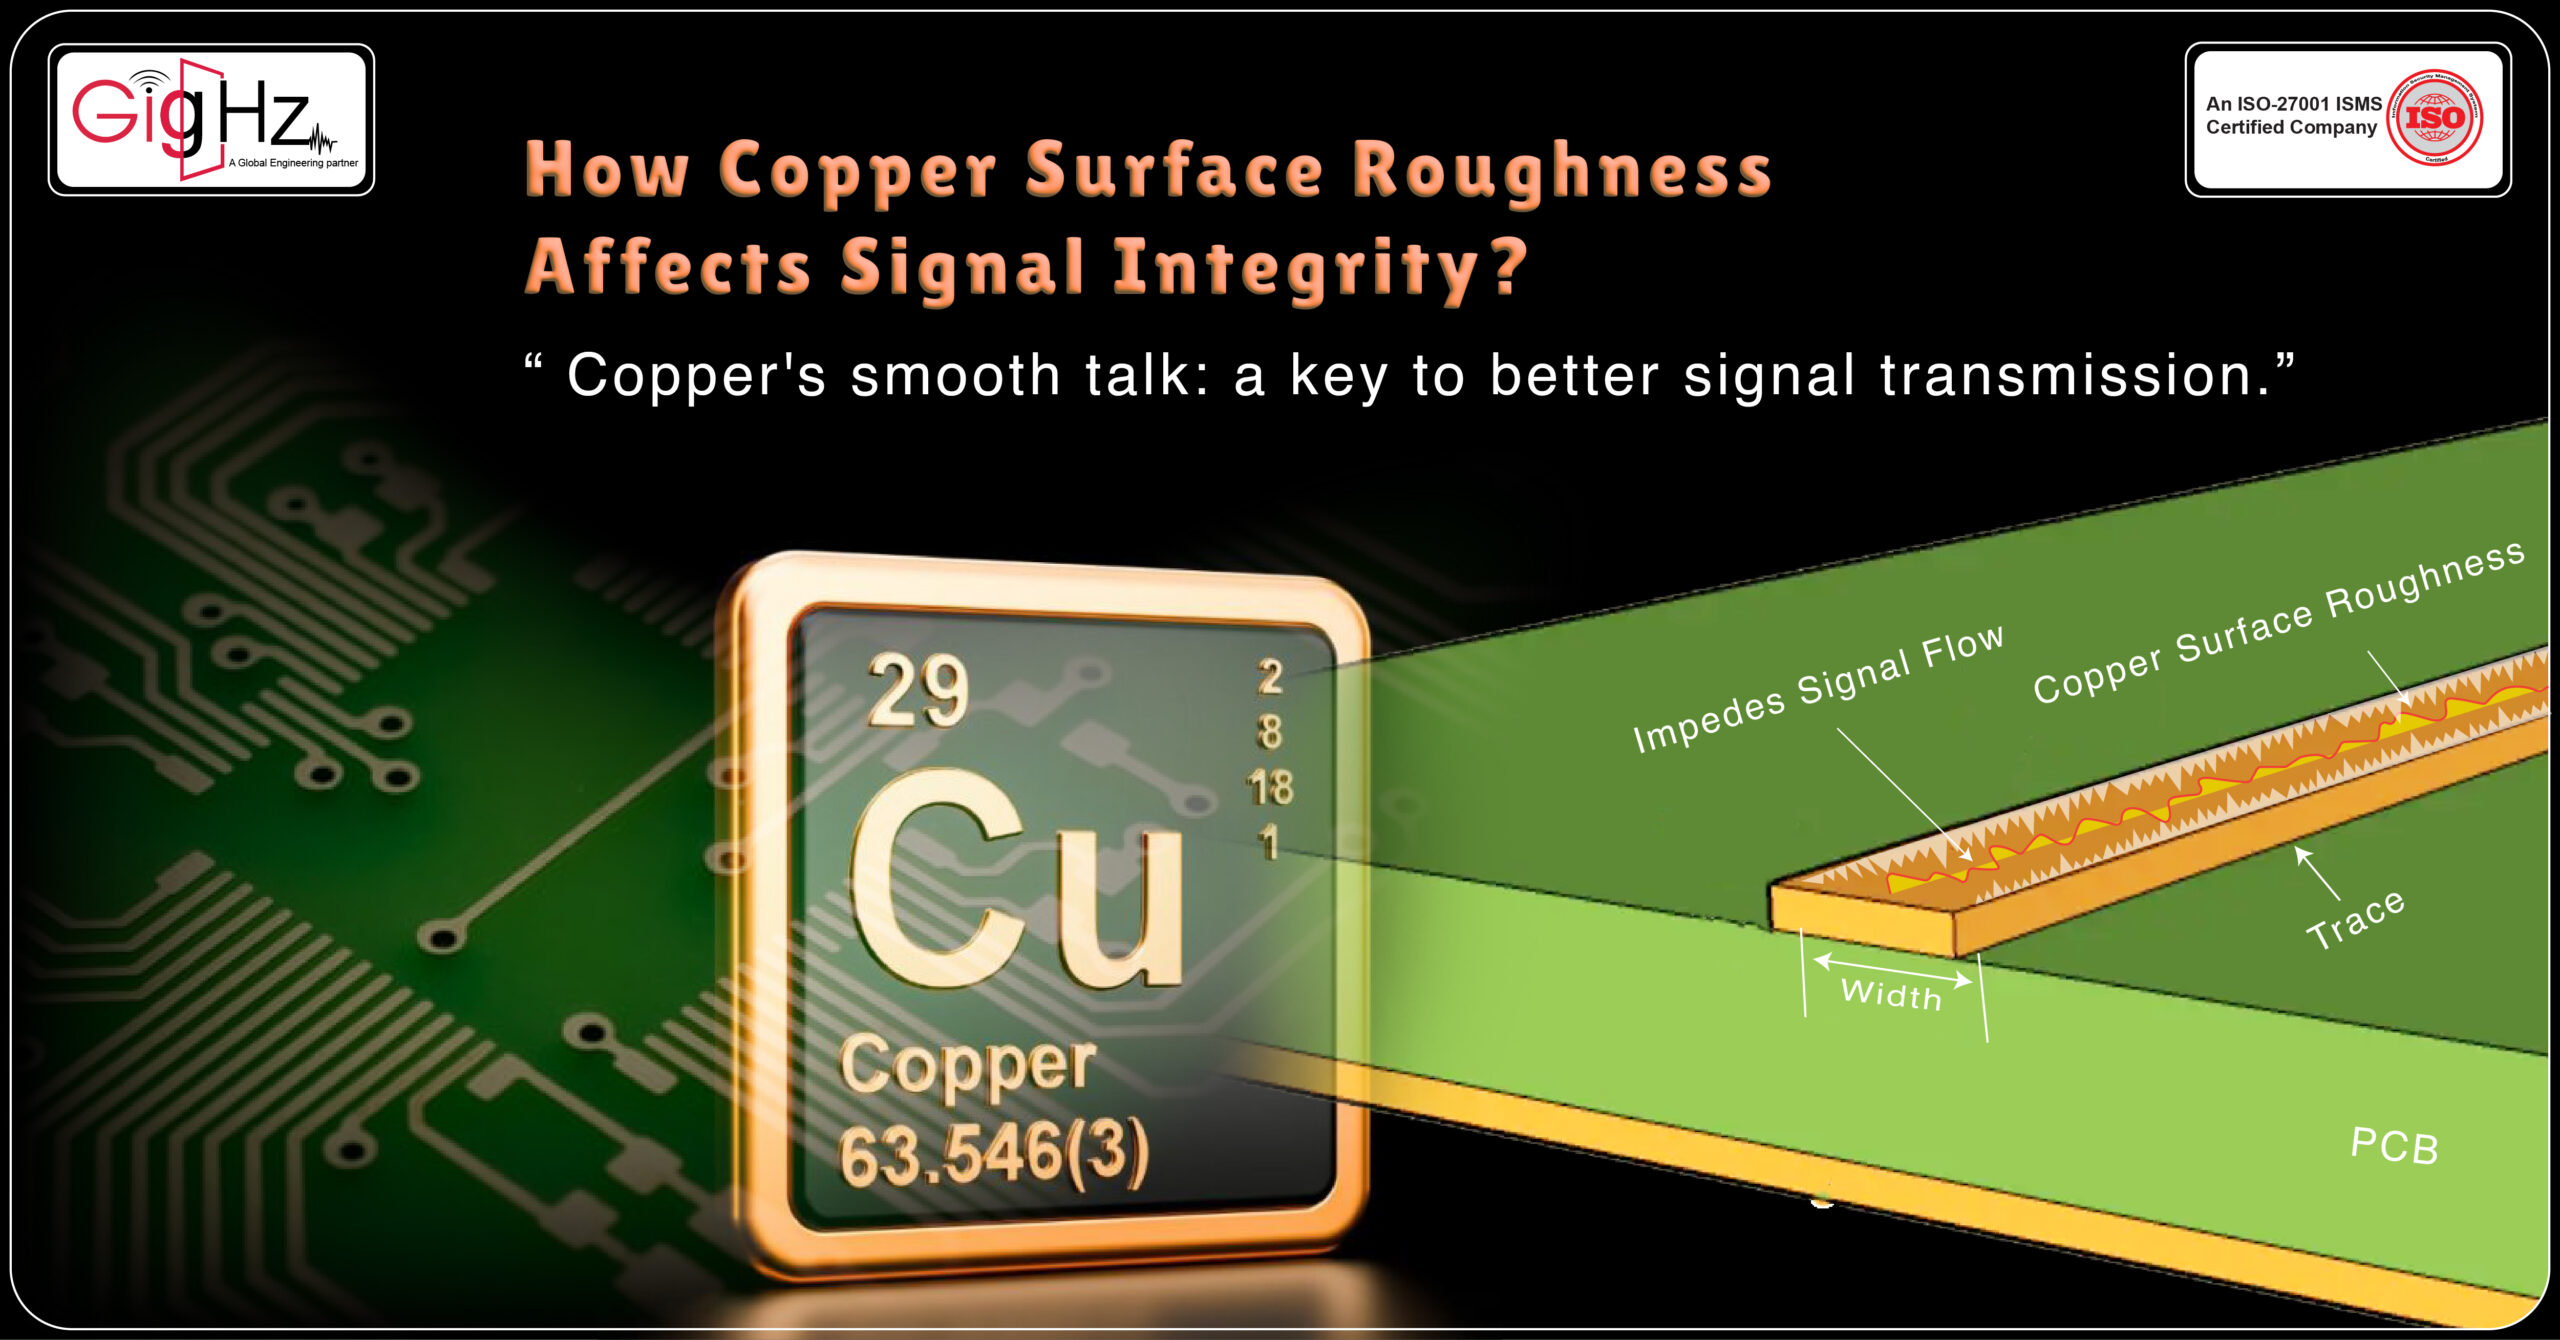 How Copper Surface Roughness Affects Signal Integrity?